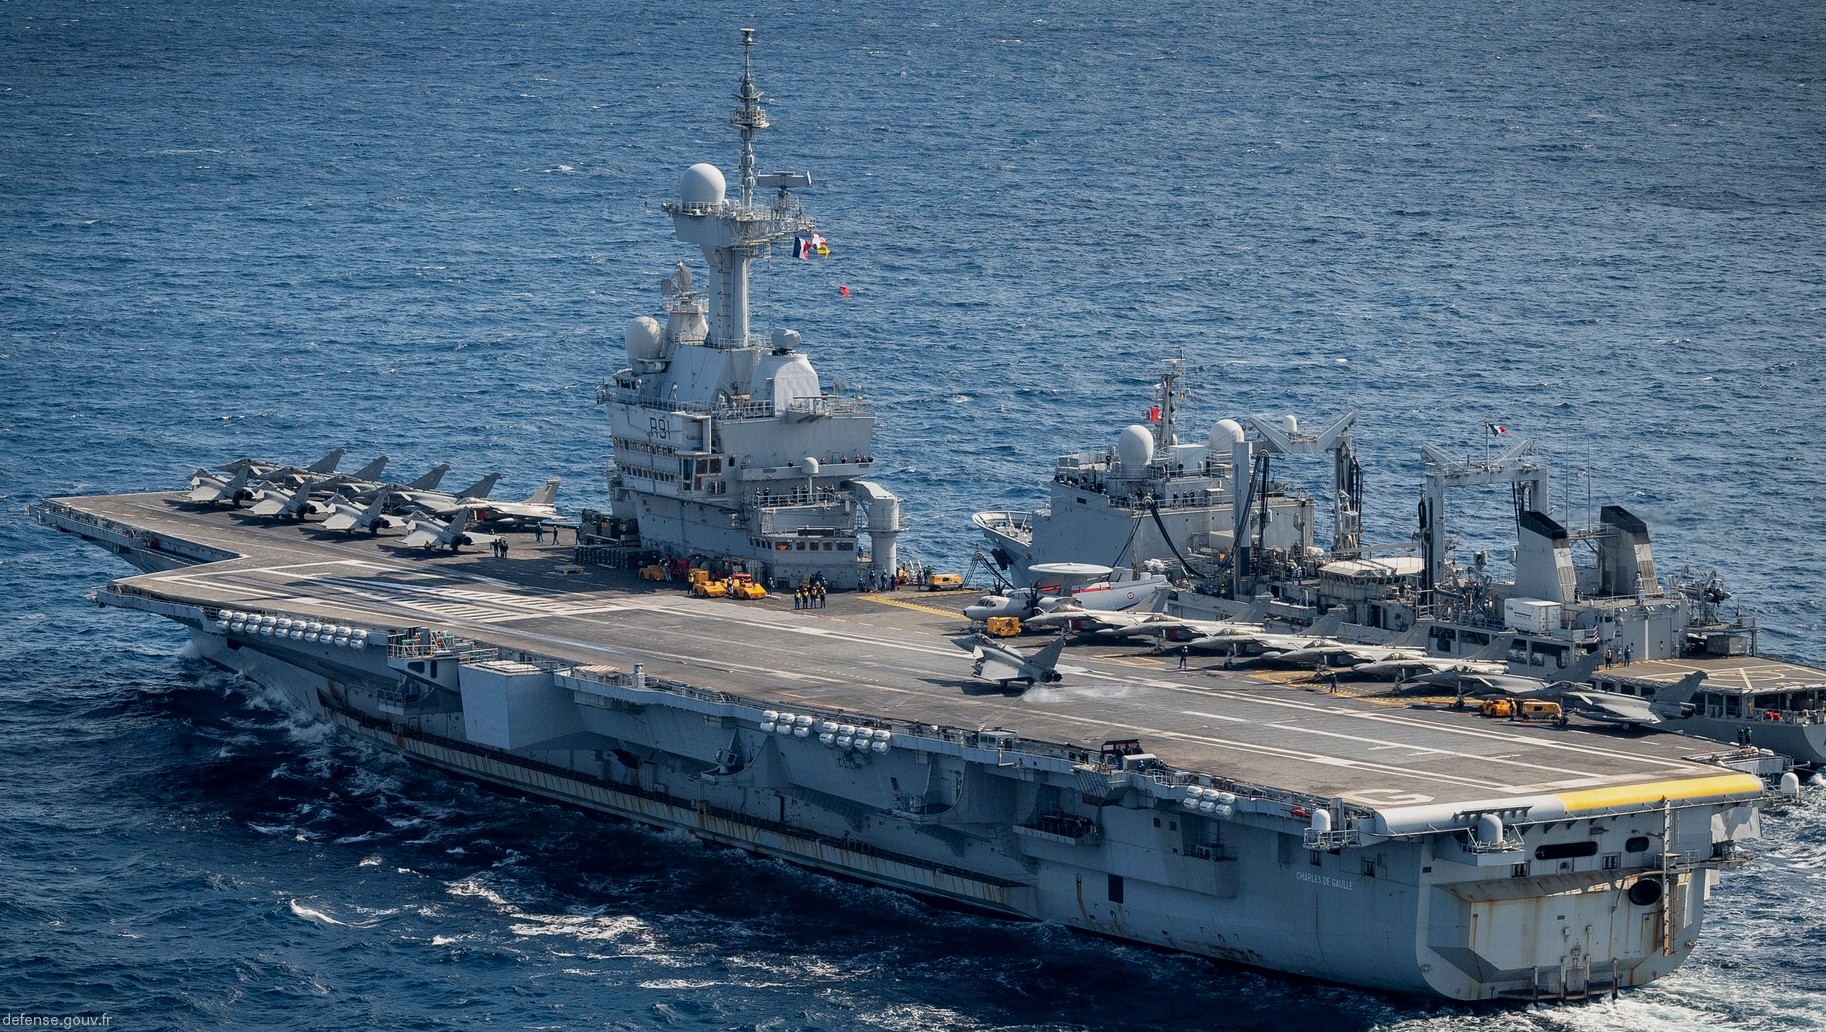 r-91 fs charles de gaulle aircraft carrier french navy 98